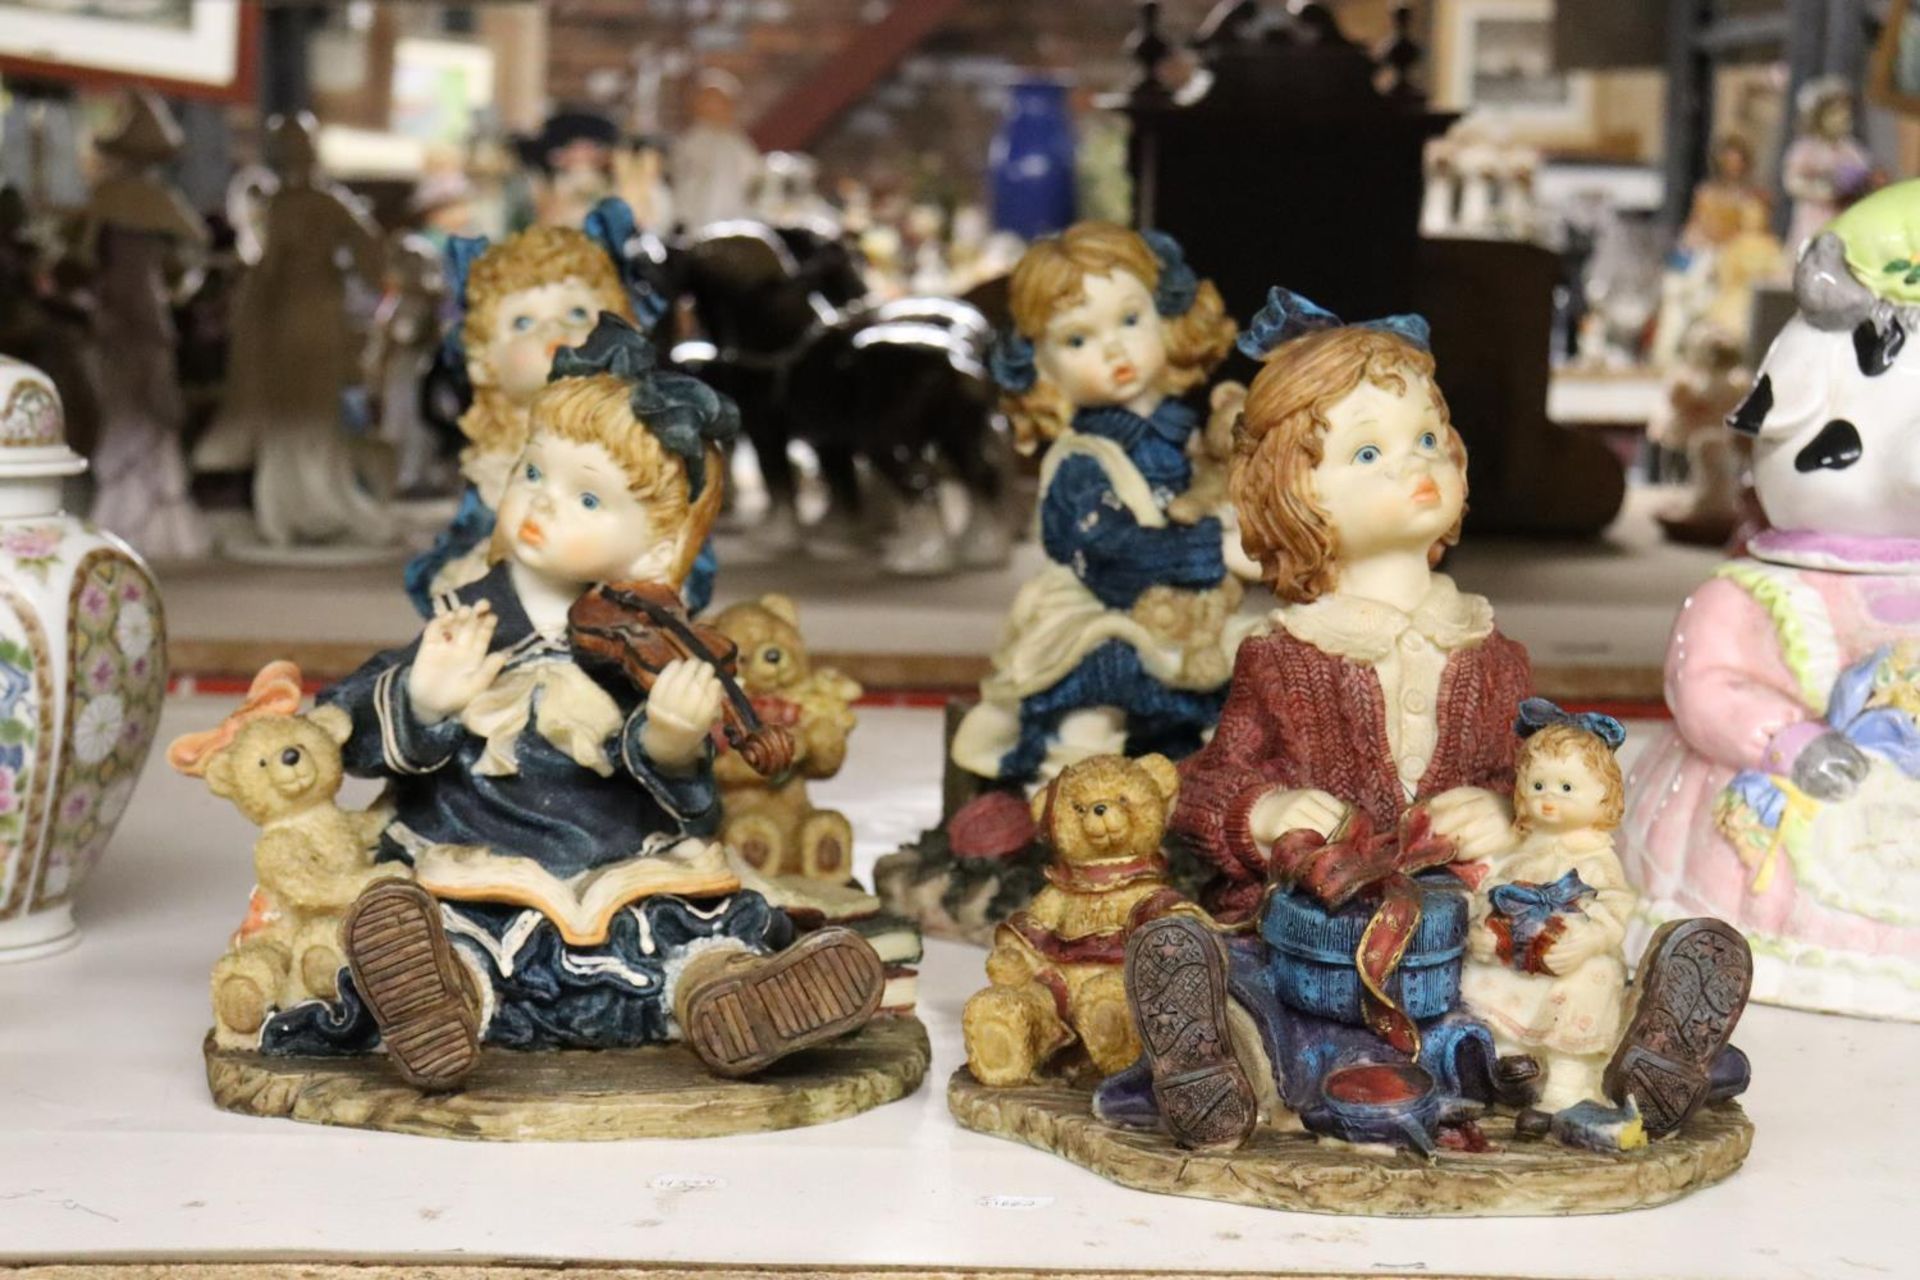 FOUR "BOYDS YESTERDAYS CHILD" DOLLSTONE COLLECTION STYLE FIGURES